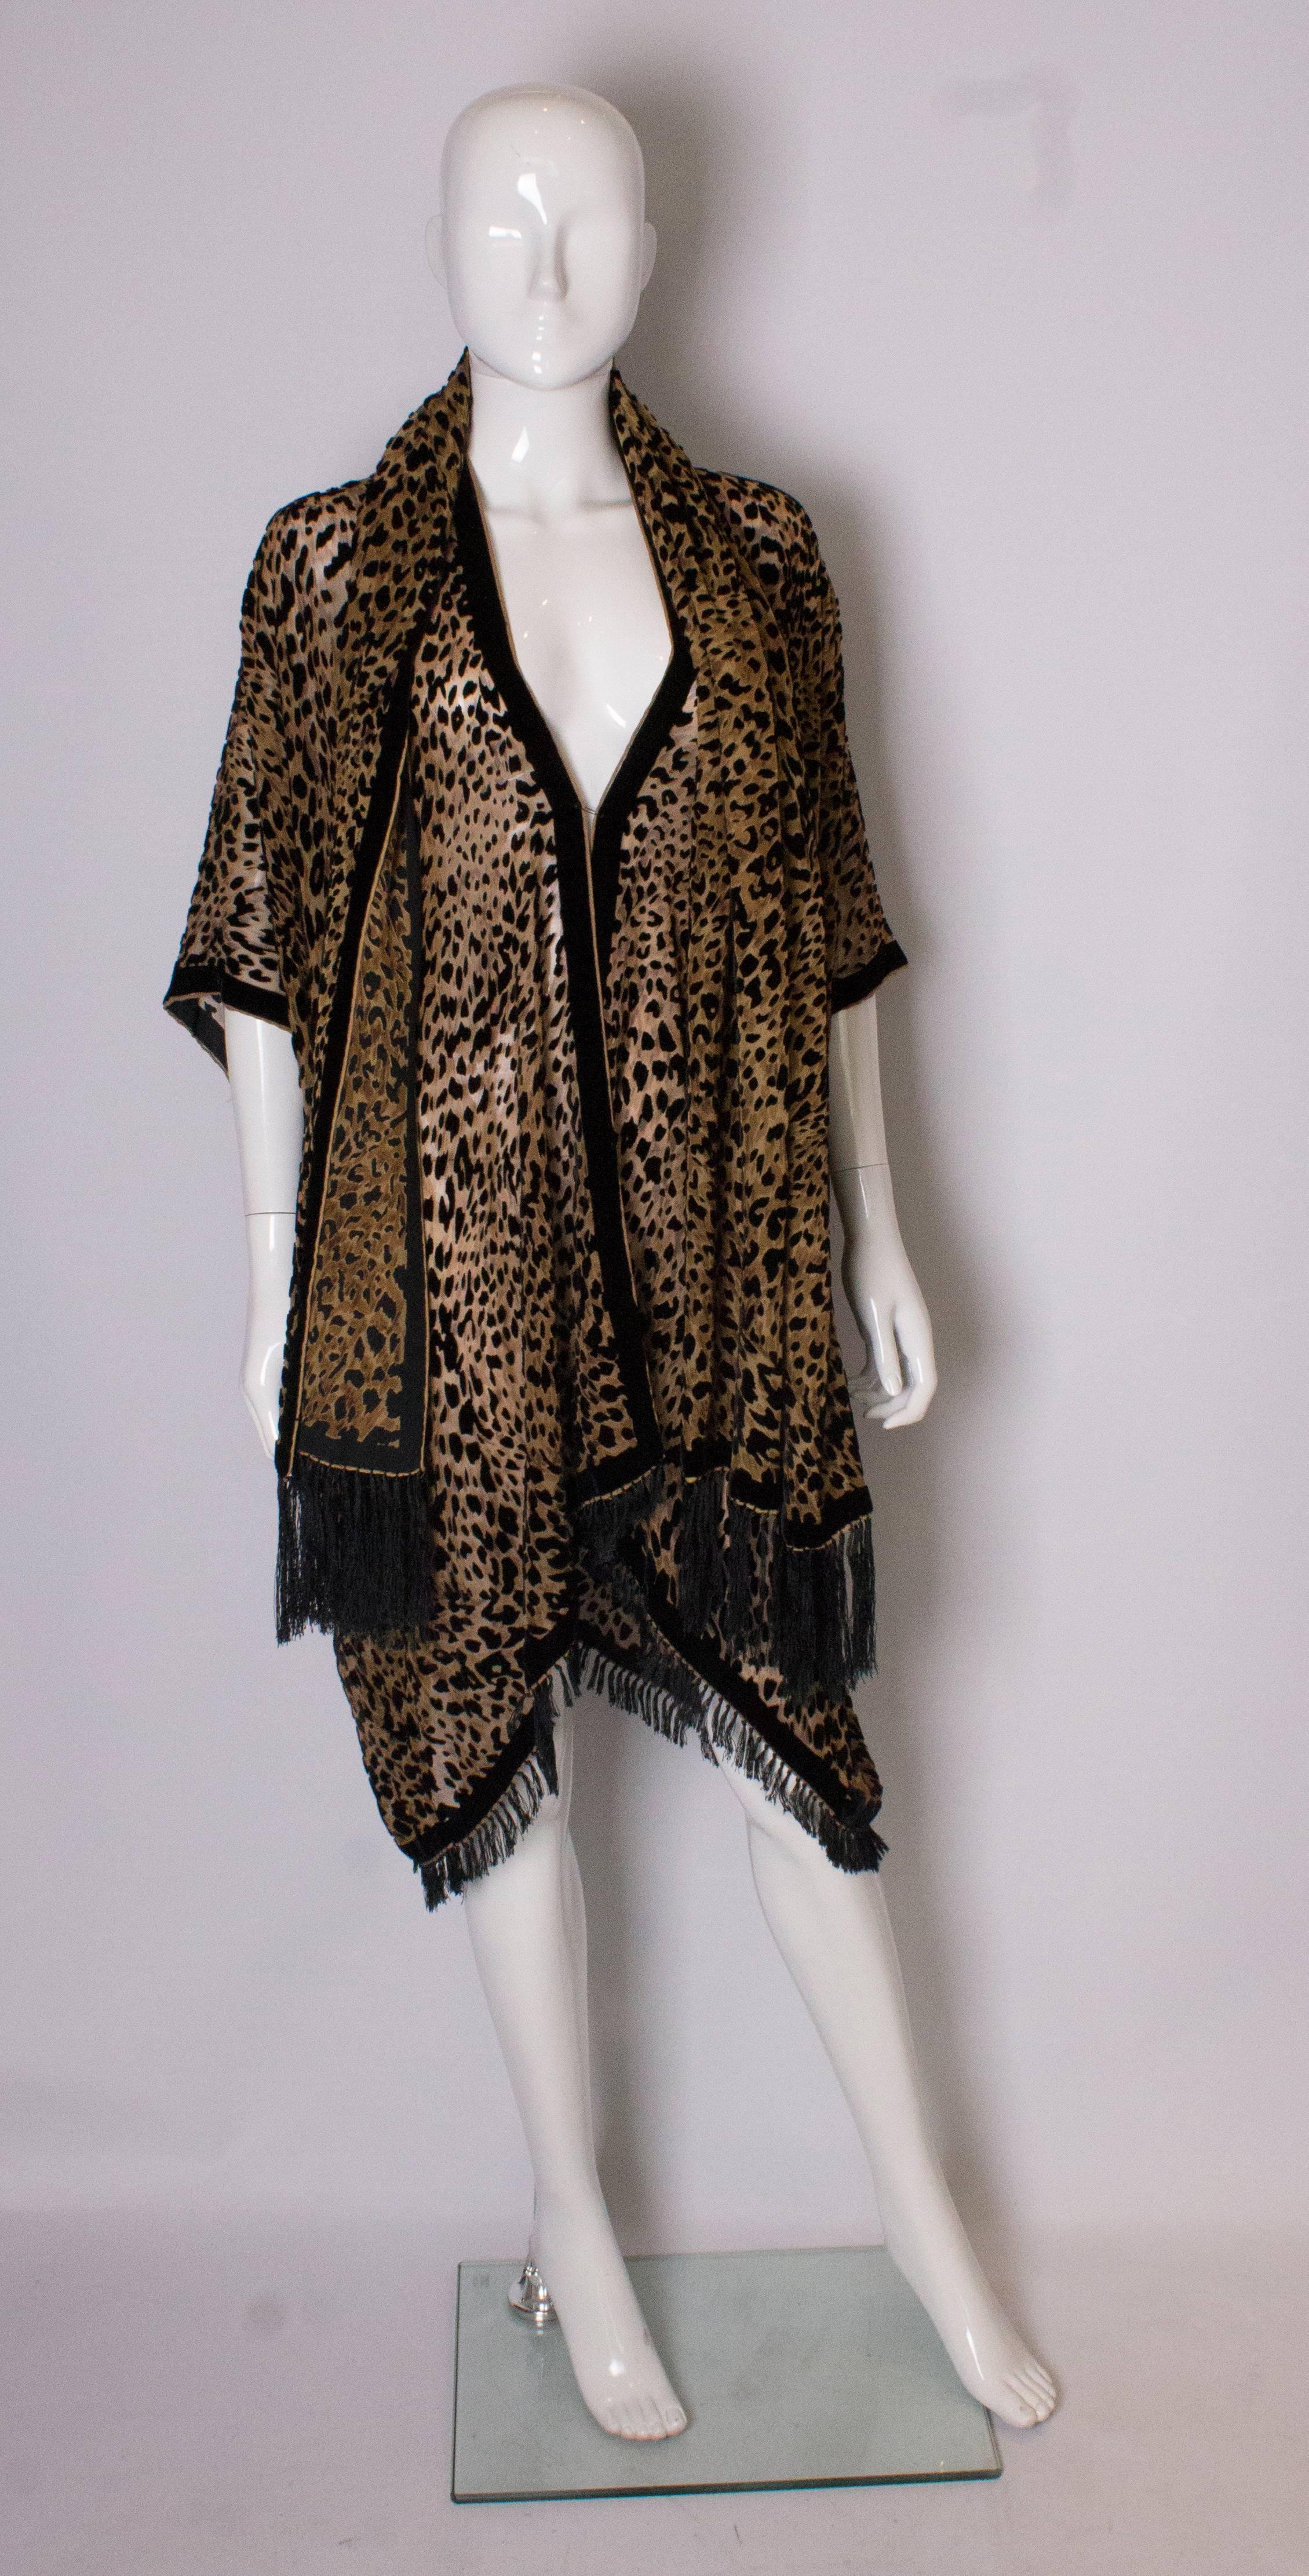 A great devoree velvet jacket and scarf in an animal print design. The jacket has a velvet trim at the front and cuffs, and fringing at the hem. It is meant to be worn loose and can fit a bust up to 48'', length 38'